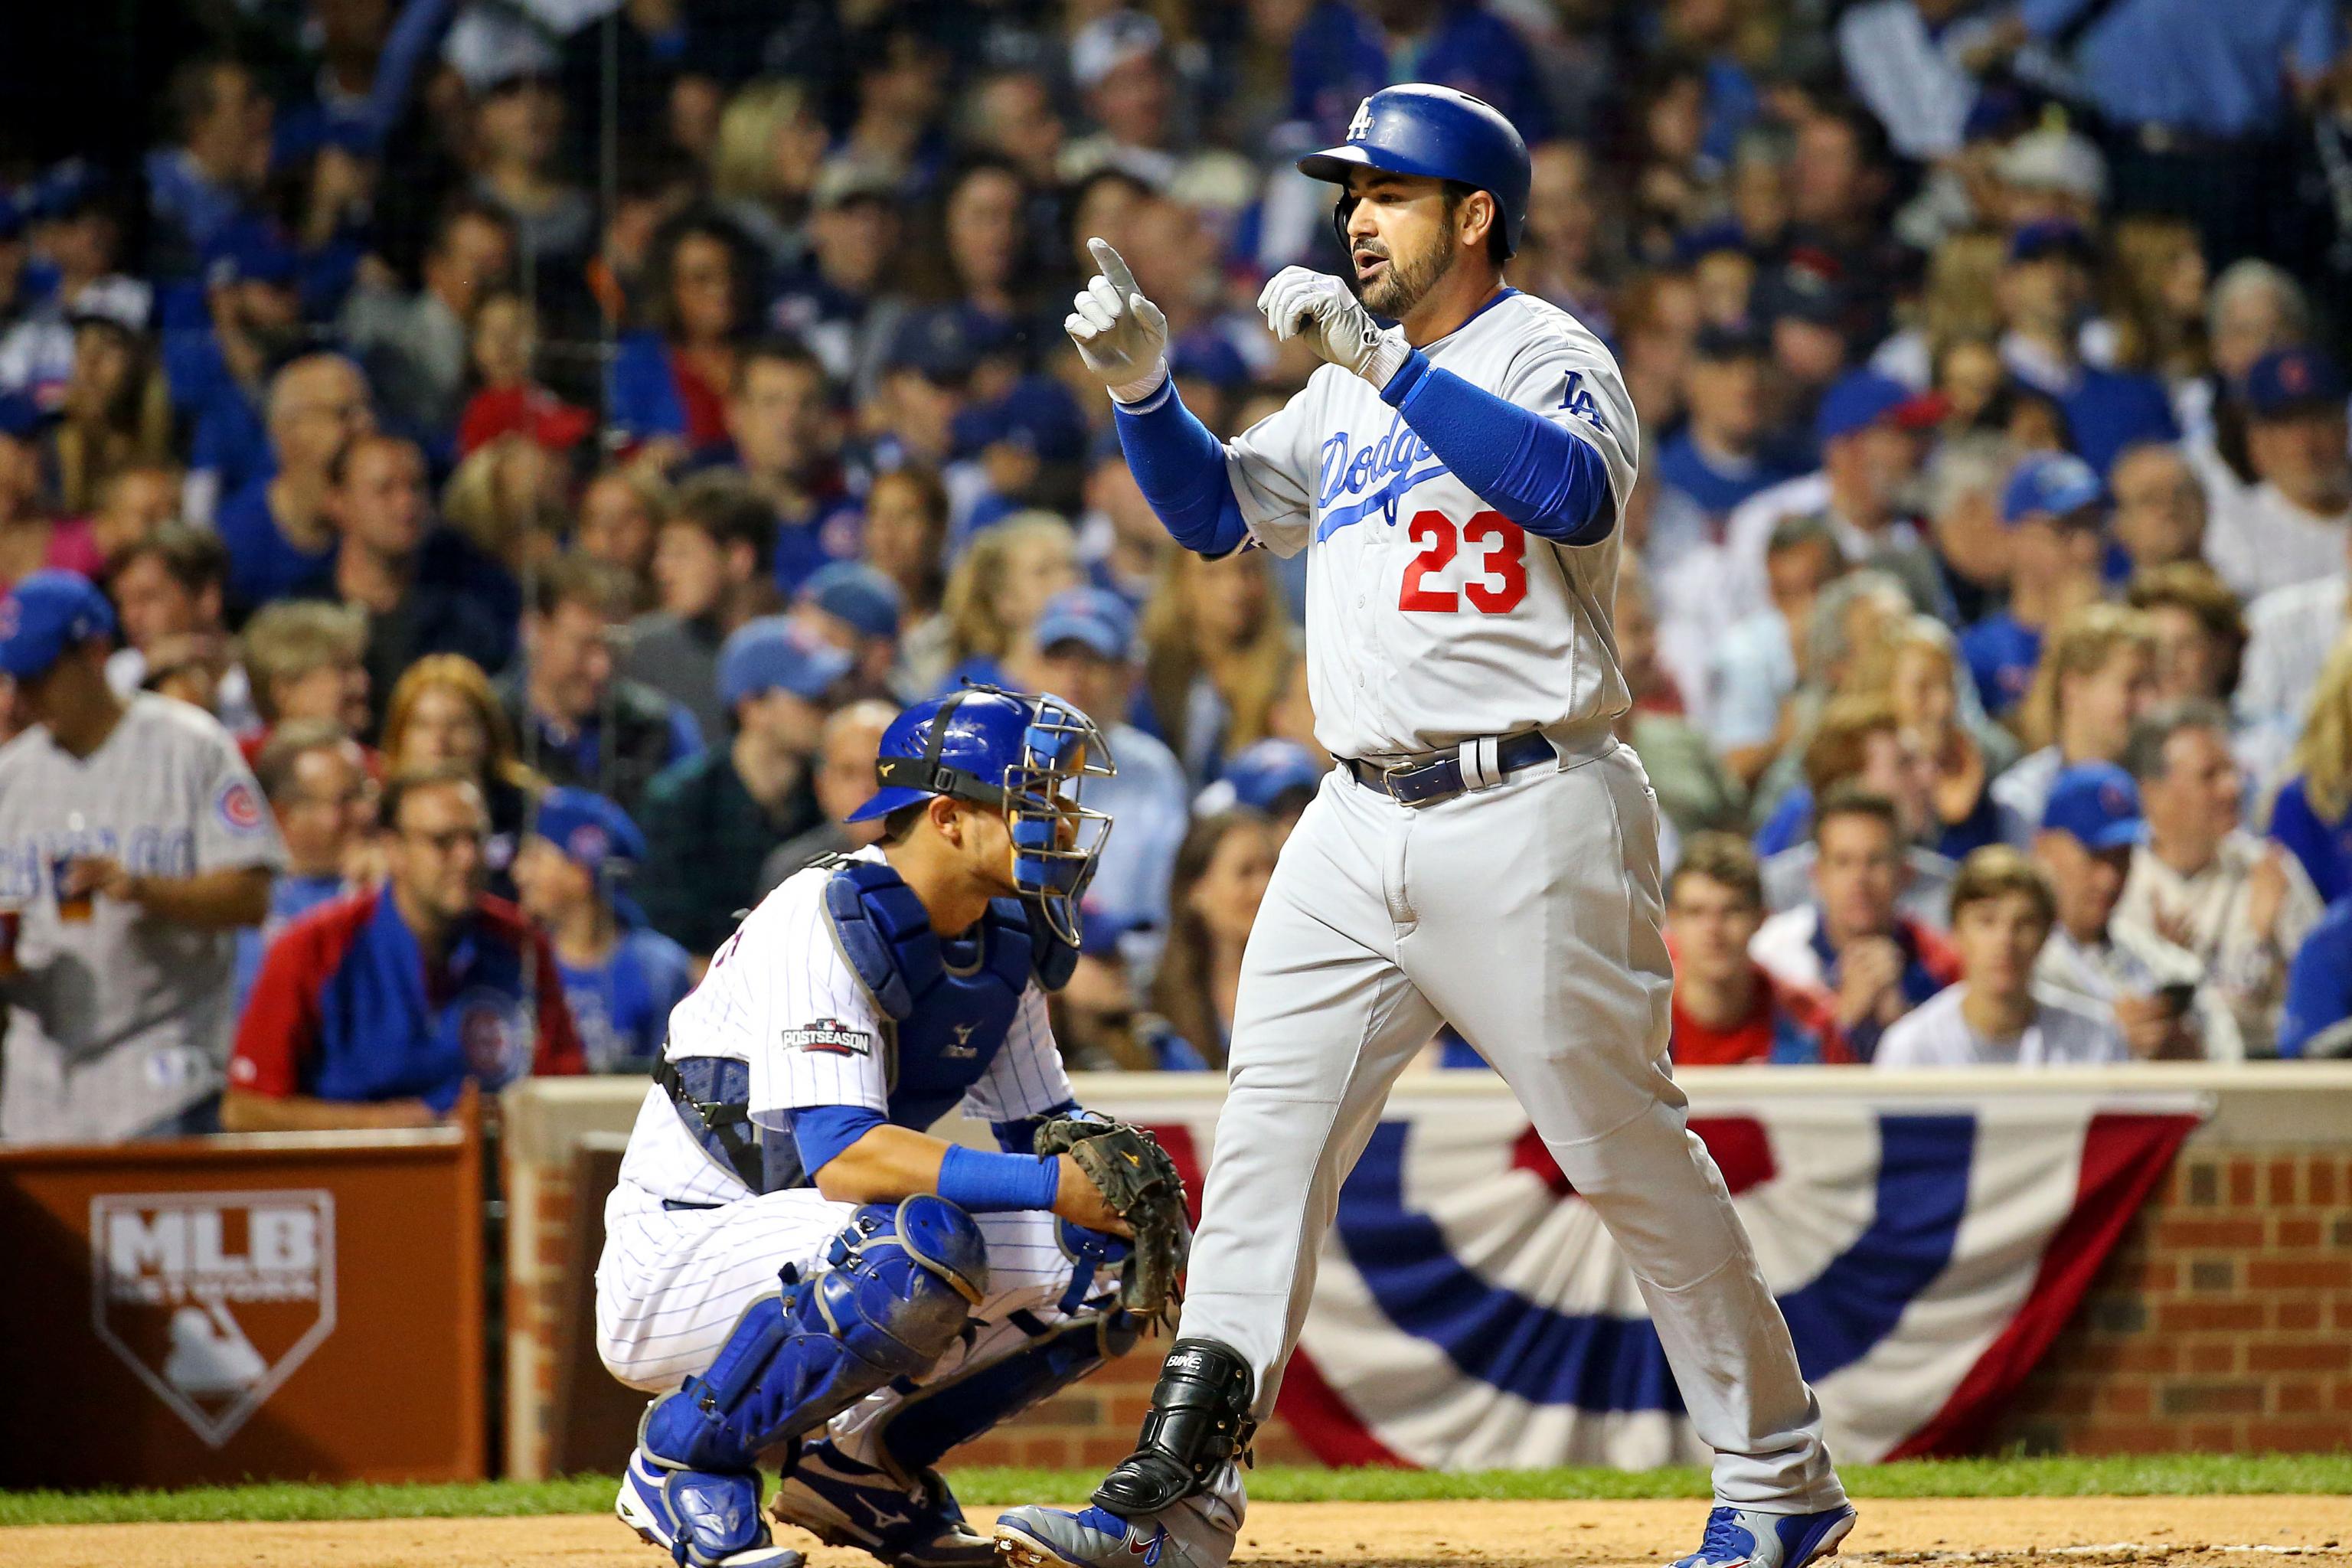 Adrian Gonzalez trashes World Baseball Classic after controversial